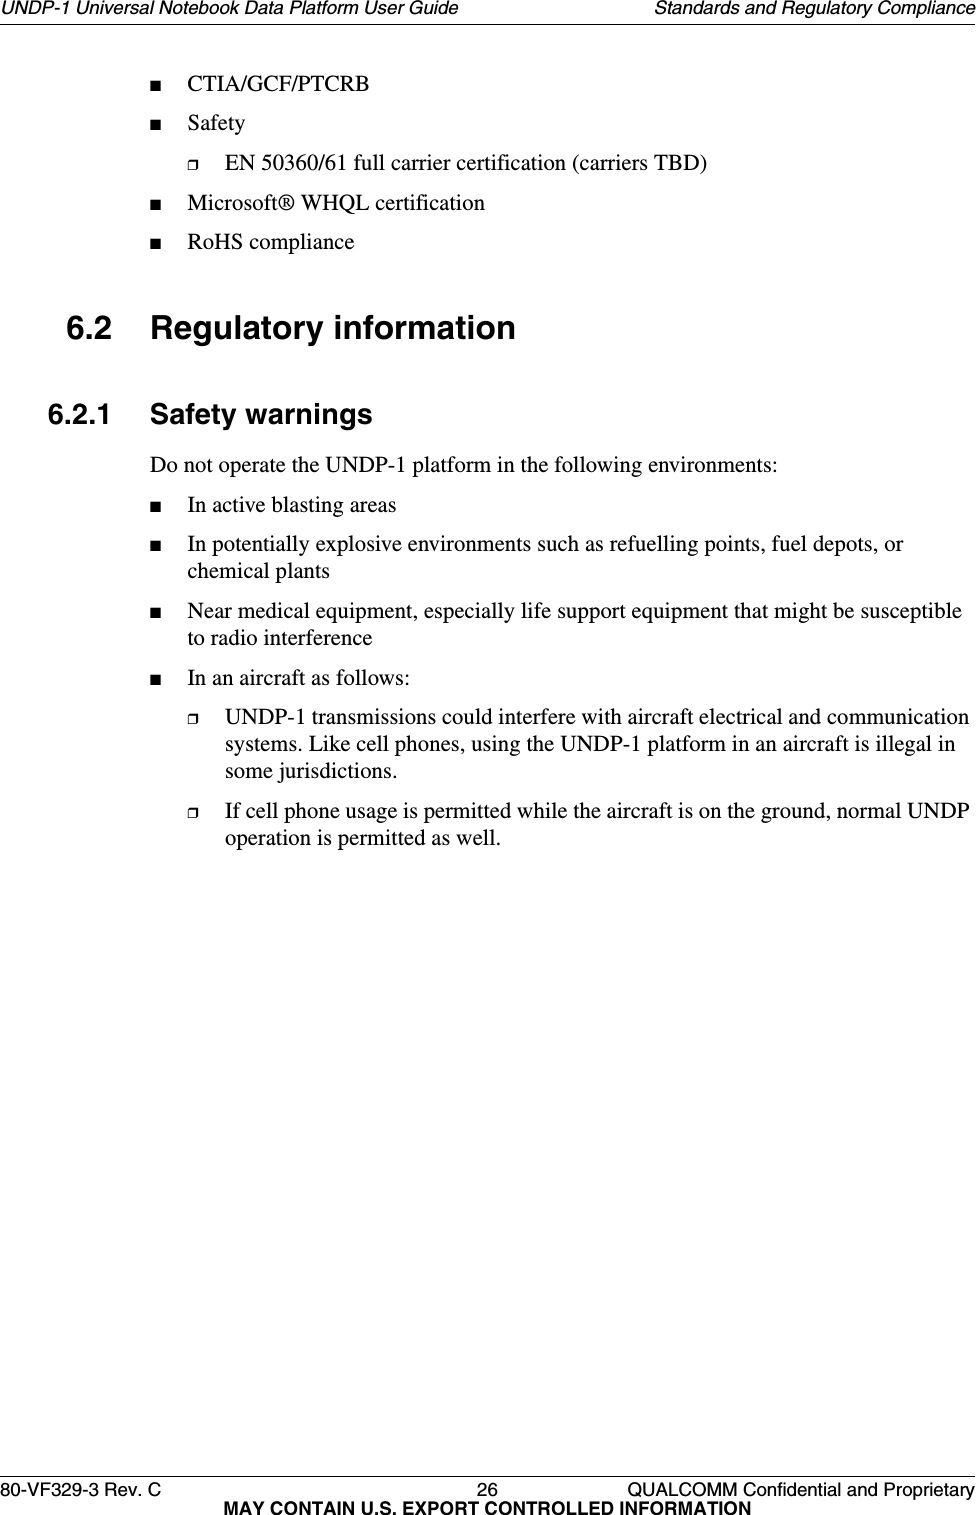 80-VF329-3 Rev. C 26 QUALCOMM Confidential and ProprietaryMAY CONTAIN U.S. EXPORT CONTROLLED INFORMATIONUNDP-1 Universal Notebook Data Platform User Guide Standards and Regulatory Compliance■CTIA/GCF/PTCRB■Safety❒EN 50360/61 full carrier certification (carriers TBD)■Microsoft® WHQL certification■RoHS compliance6.2 Regulatory information6.2.1 Safety warningsDo not operate the UNDP-1 platform in the following environments:■In active blasting areas■In potentially explosive environments such as refuelling points, fuel depots, or chemical plants■Near medical equipment, especially life support equipment that might be susceptible to radio interference■In an aircraft as follows:❒UNDP-1 transmissions could interfere with aircraft electrical and communication systems. Like cell phones, using the UNDP-1 platform in an aircraft is illegal in some jurisdictions.❒If cell phone usage is permitted while the aircraft is on the ground, normal UNDP operation is permitted as well.